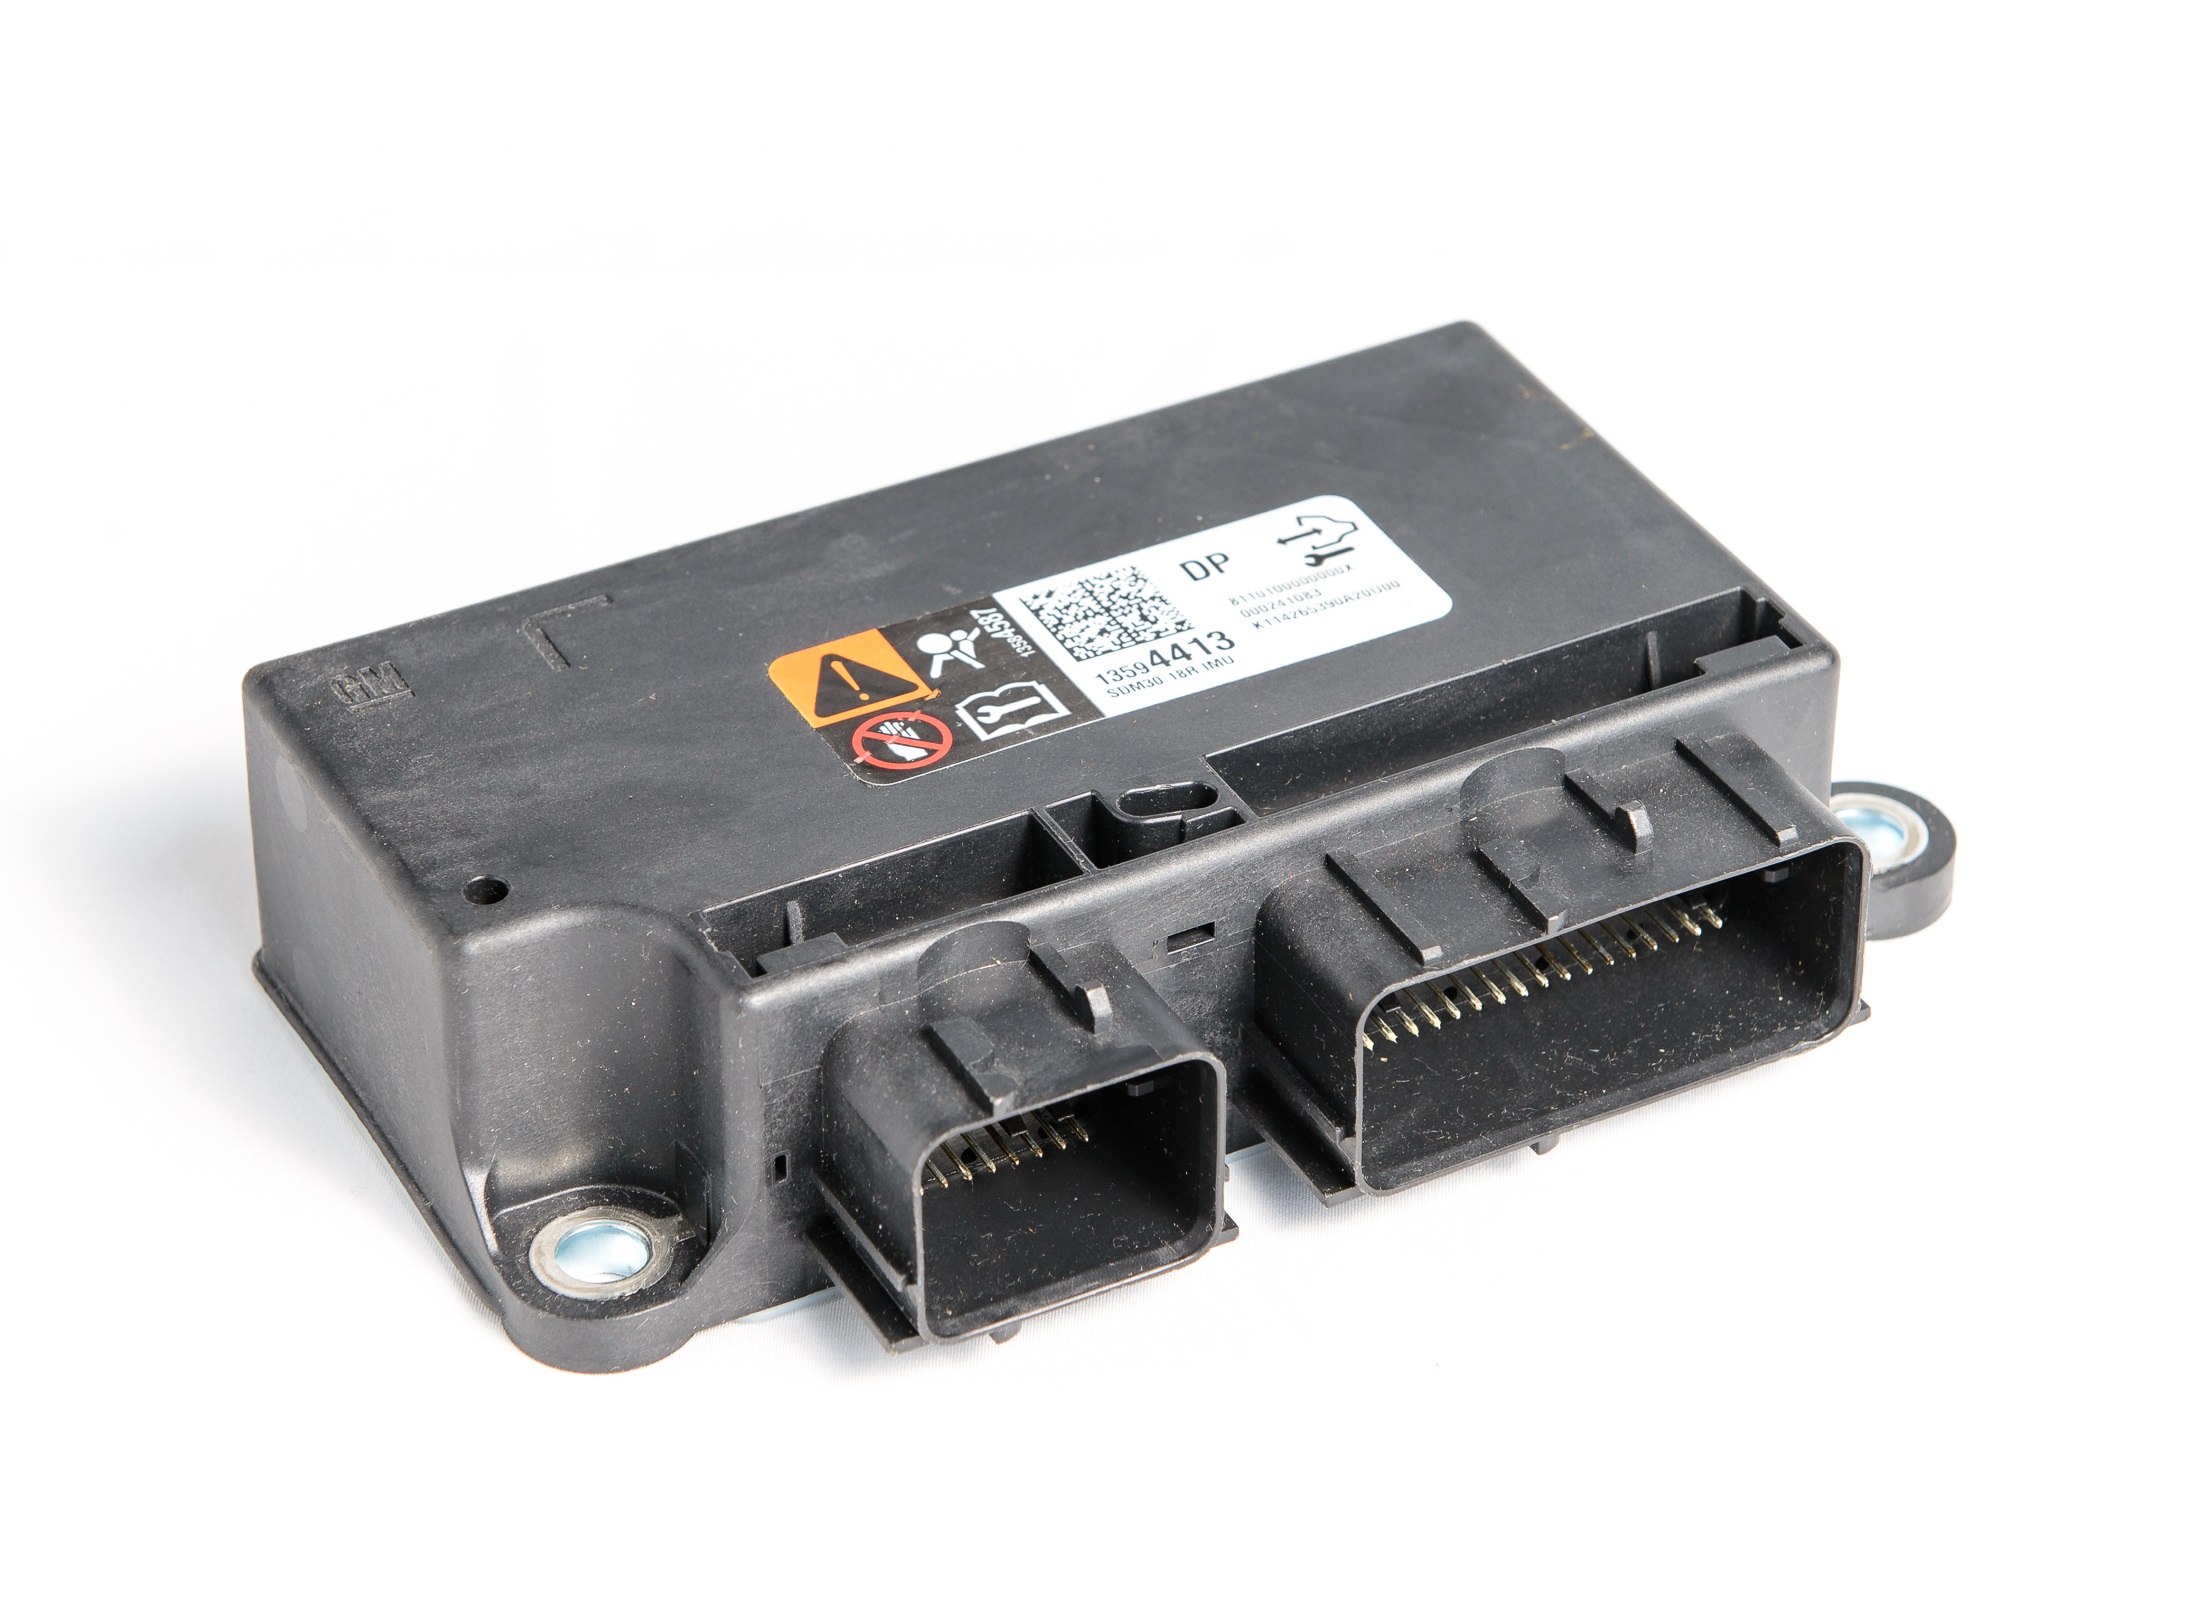 Mercedes CL500 SRS Airbag Control Module Reset